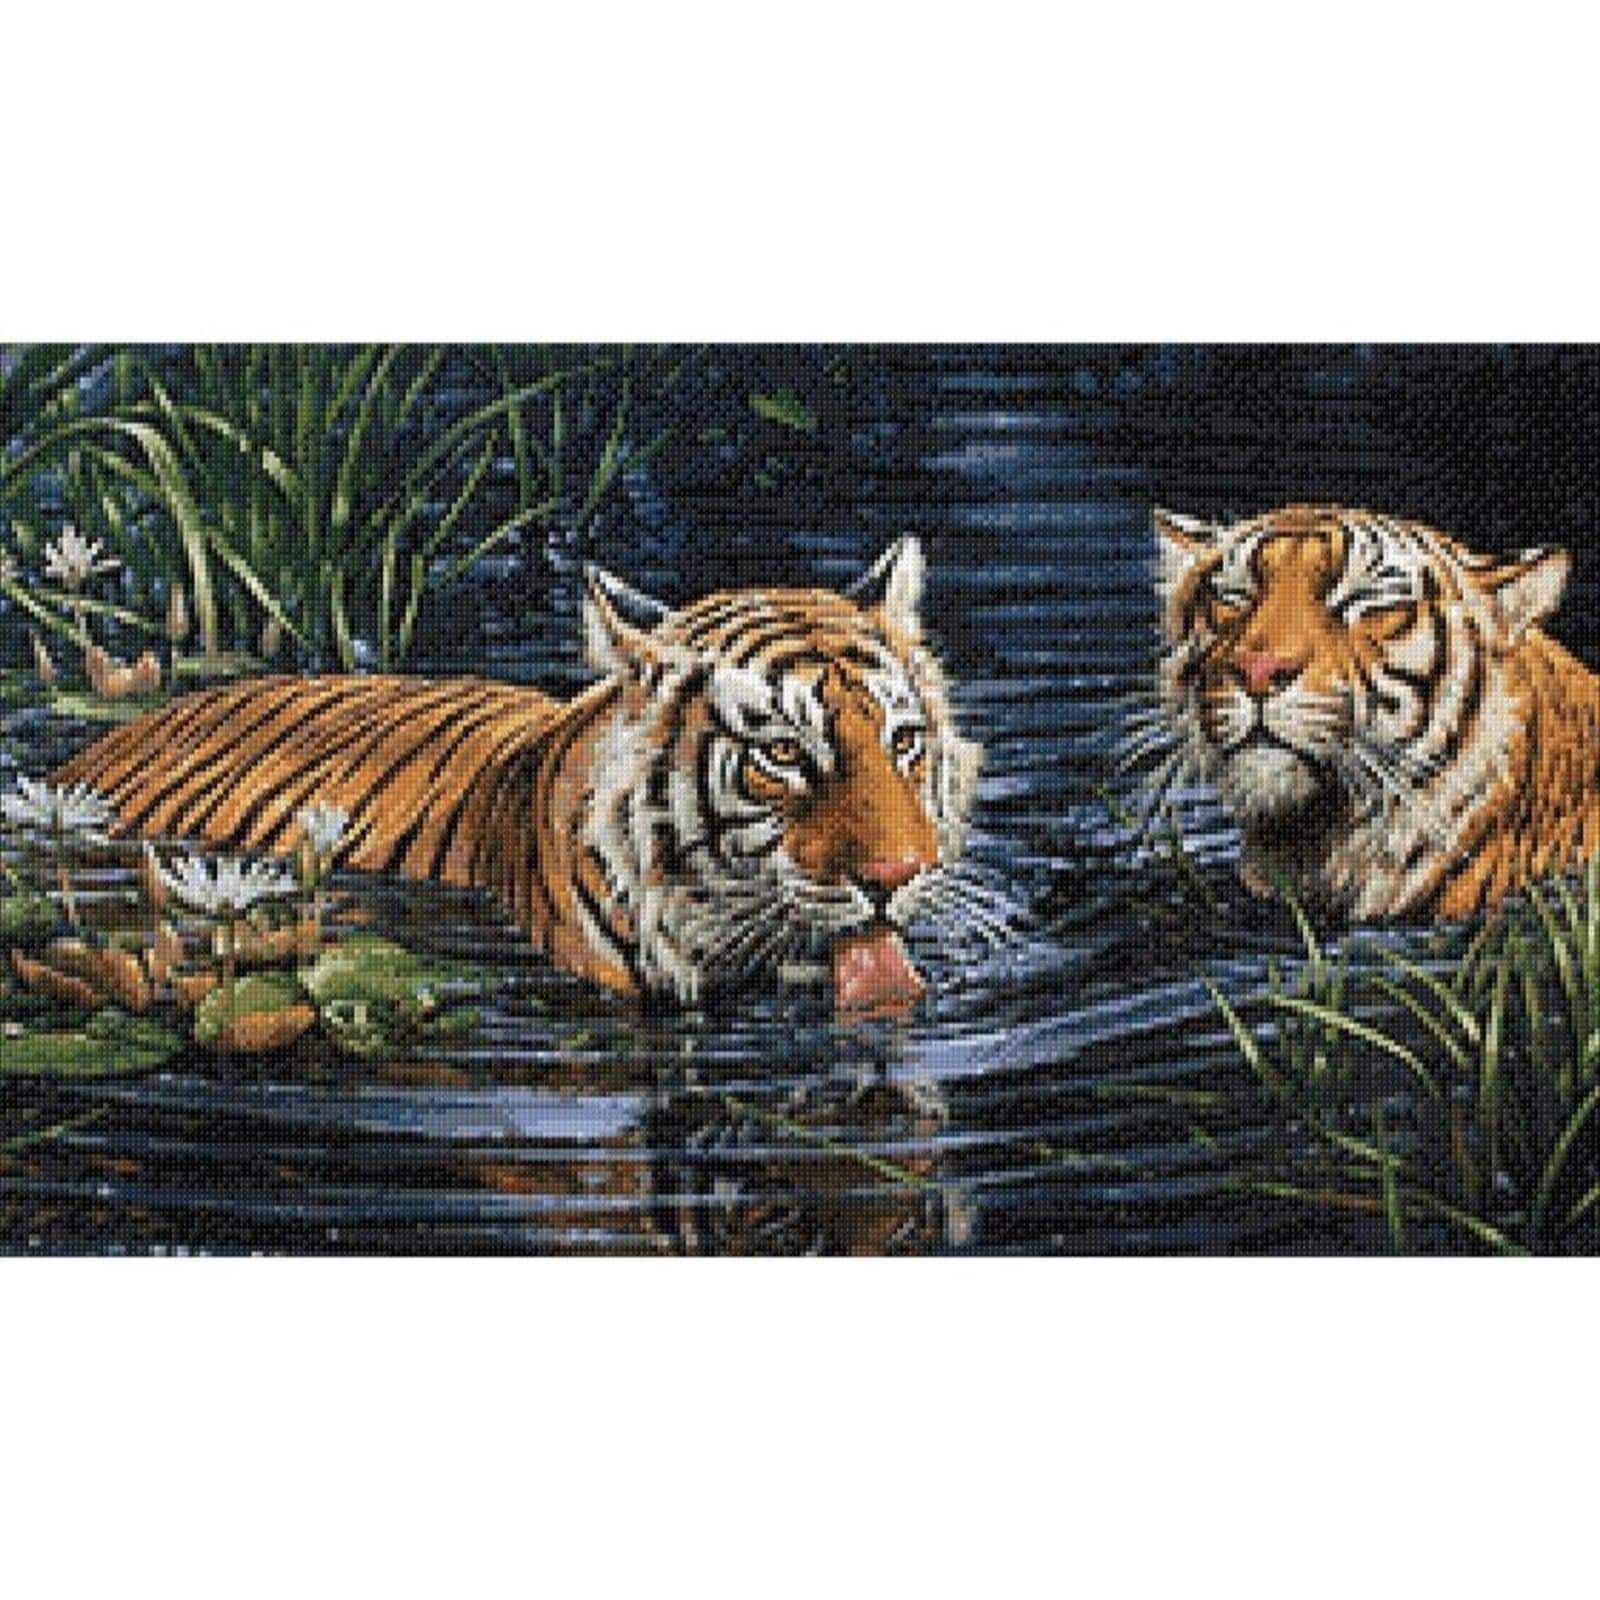 Golden Tiger From Crafting Spark - Diamond Painting - Kits - Casa